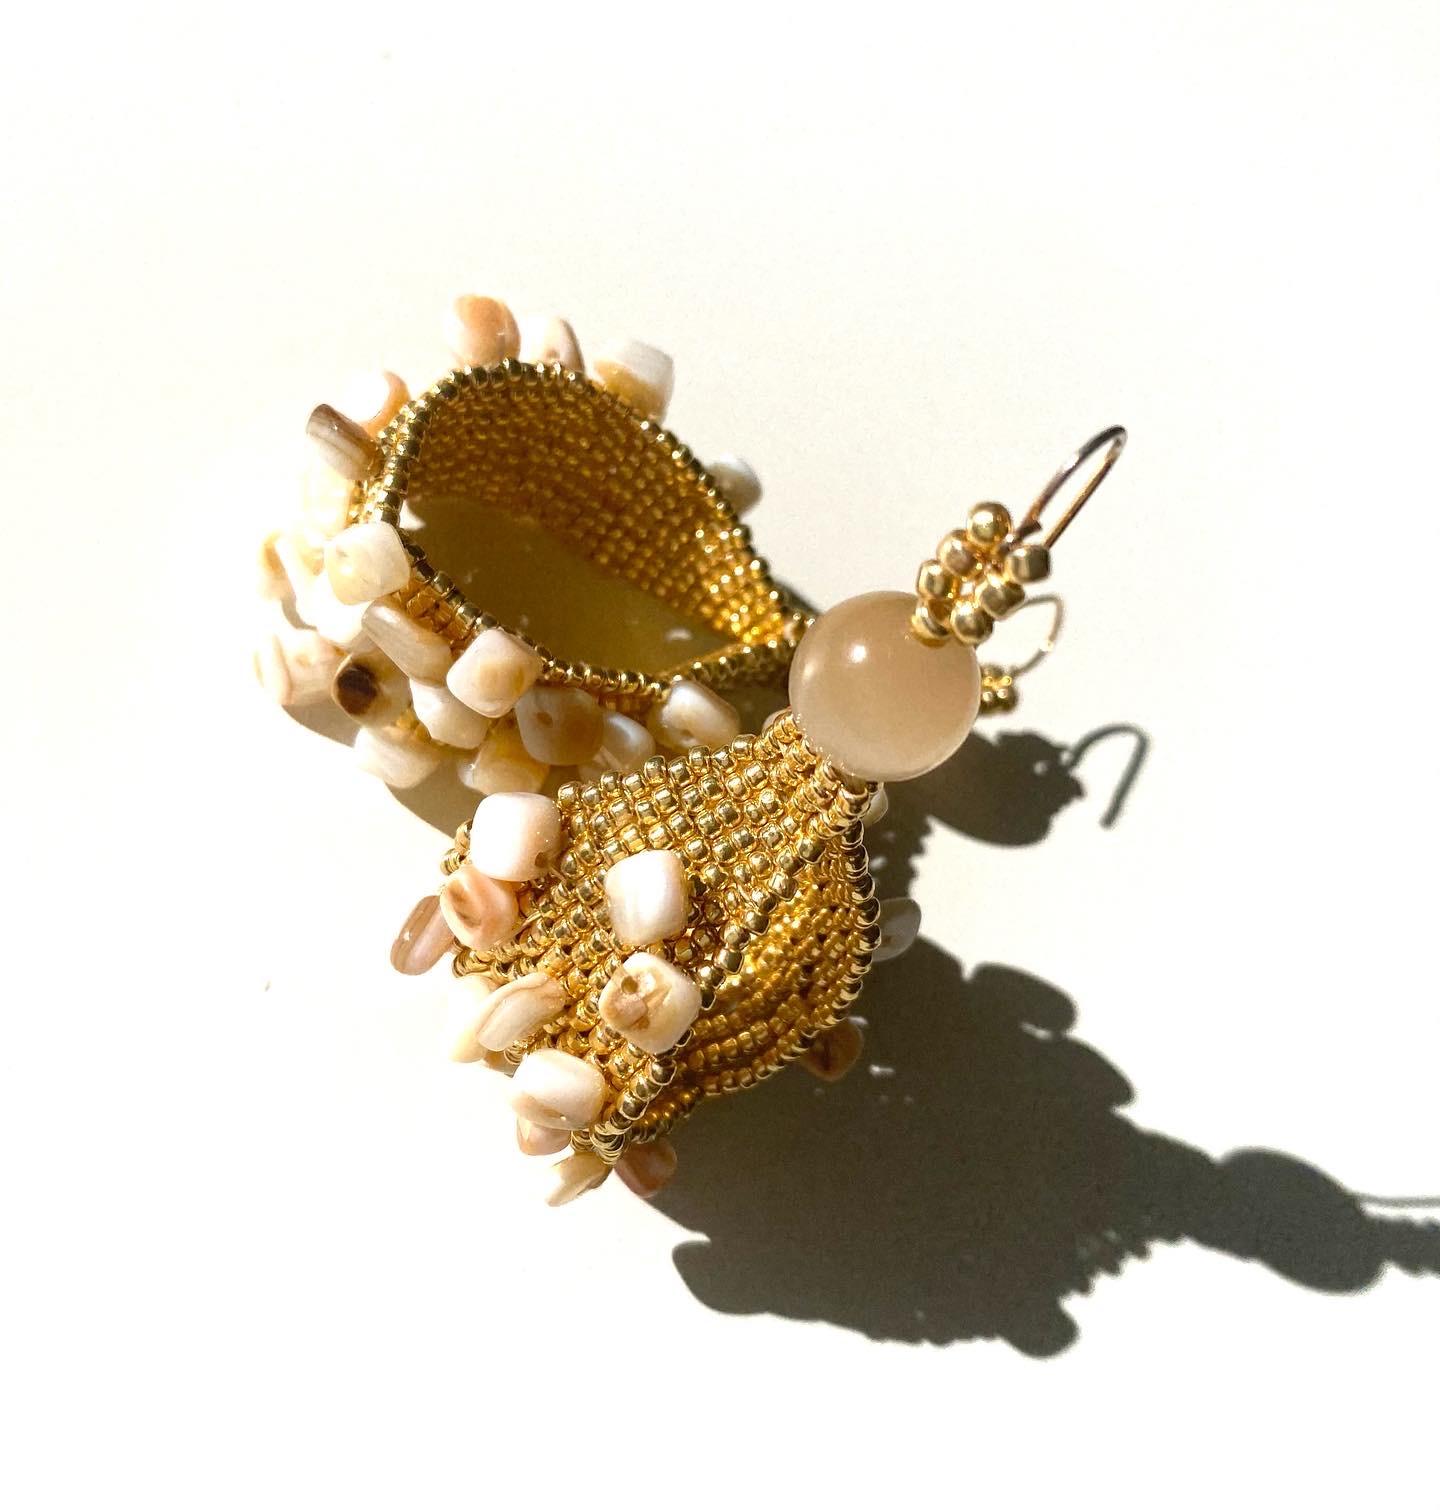 Handwoven permanent 14k gold plated seed beads in wide loop form embroidered with numerous conch shell beads and cats eye glass beads. Inspired by the golden sandy beaches of the Caribbean and the natural treasures that lay upon it.  Conchita hoop